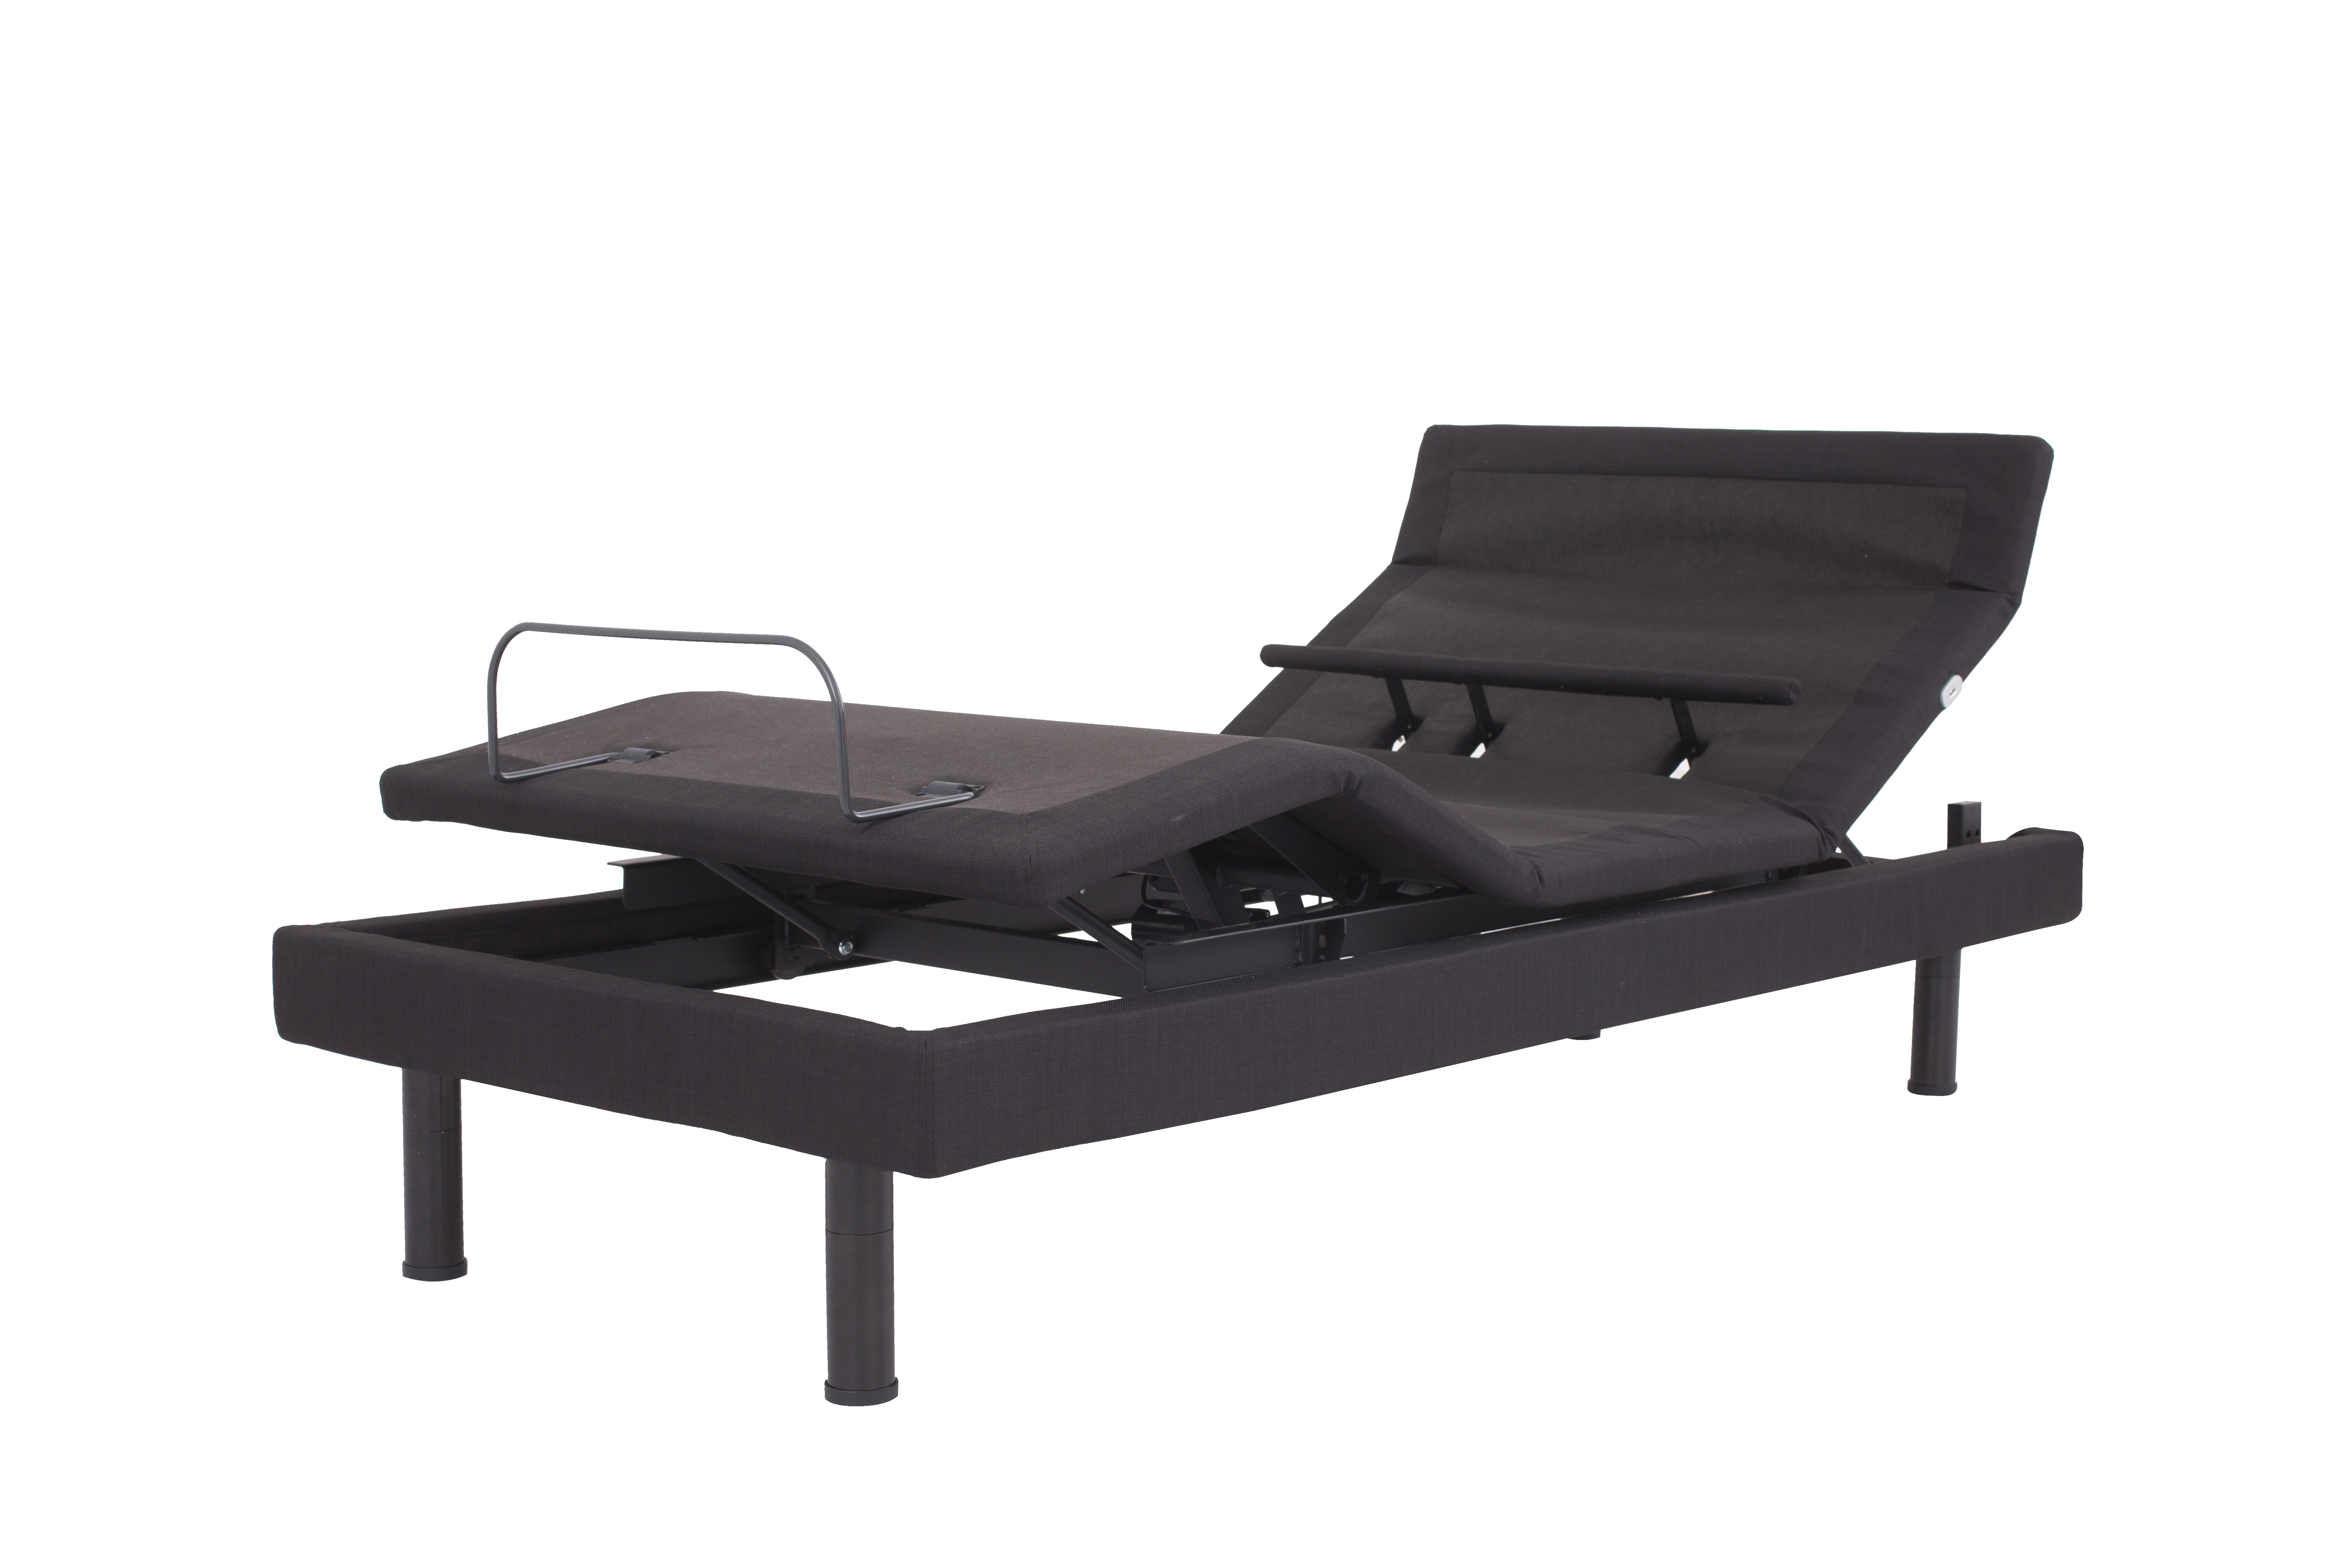 A black NE500S Base shown in adjusted position with head, lumbar, and foot of bed elevated; black base and black legs against a white background.